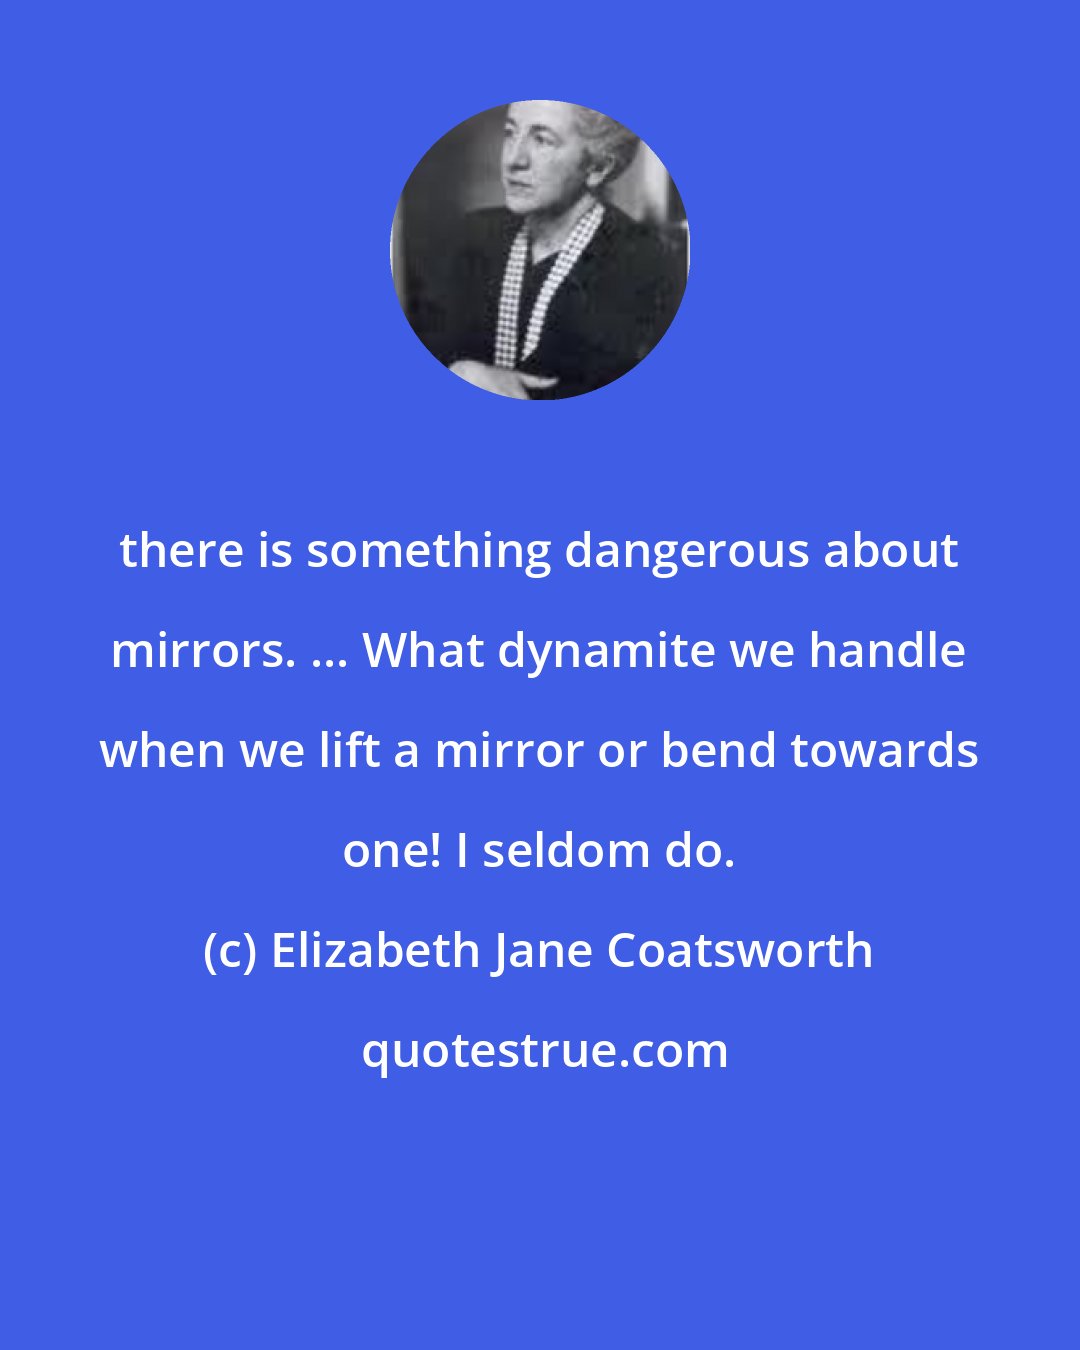 Elizabeth Jane Coatsworth: there is something dangerous about mirrors. ... What dynamite we handle when we lift a mirror or bend towards one! I seldom do.